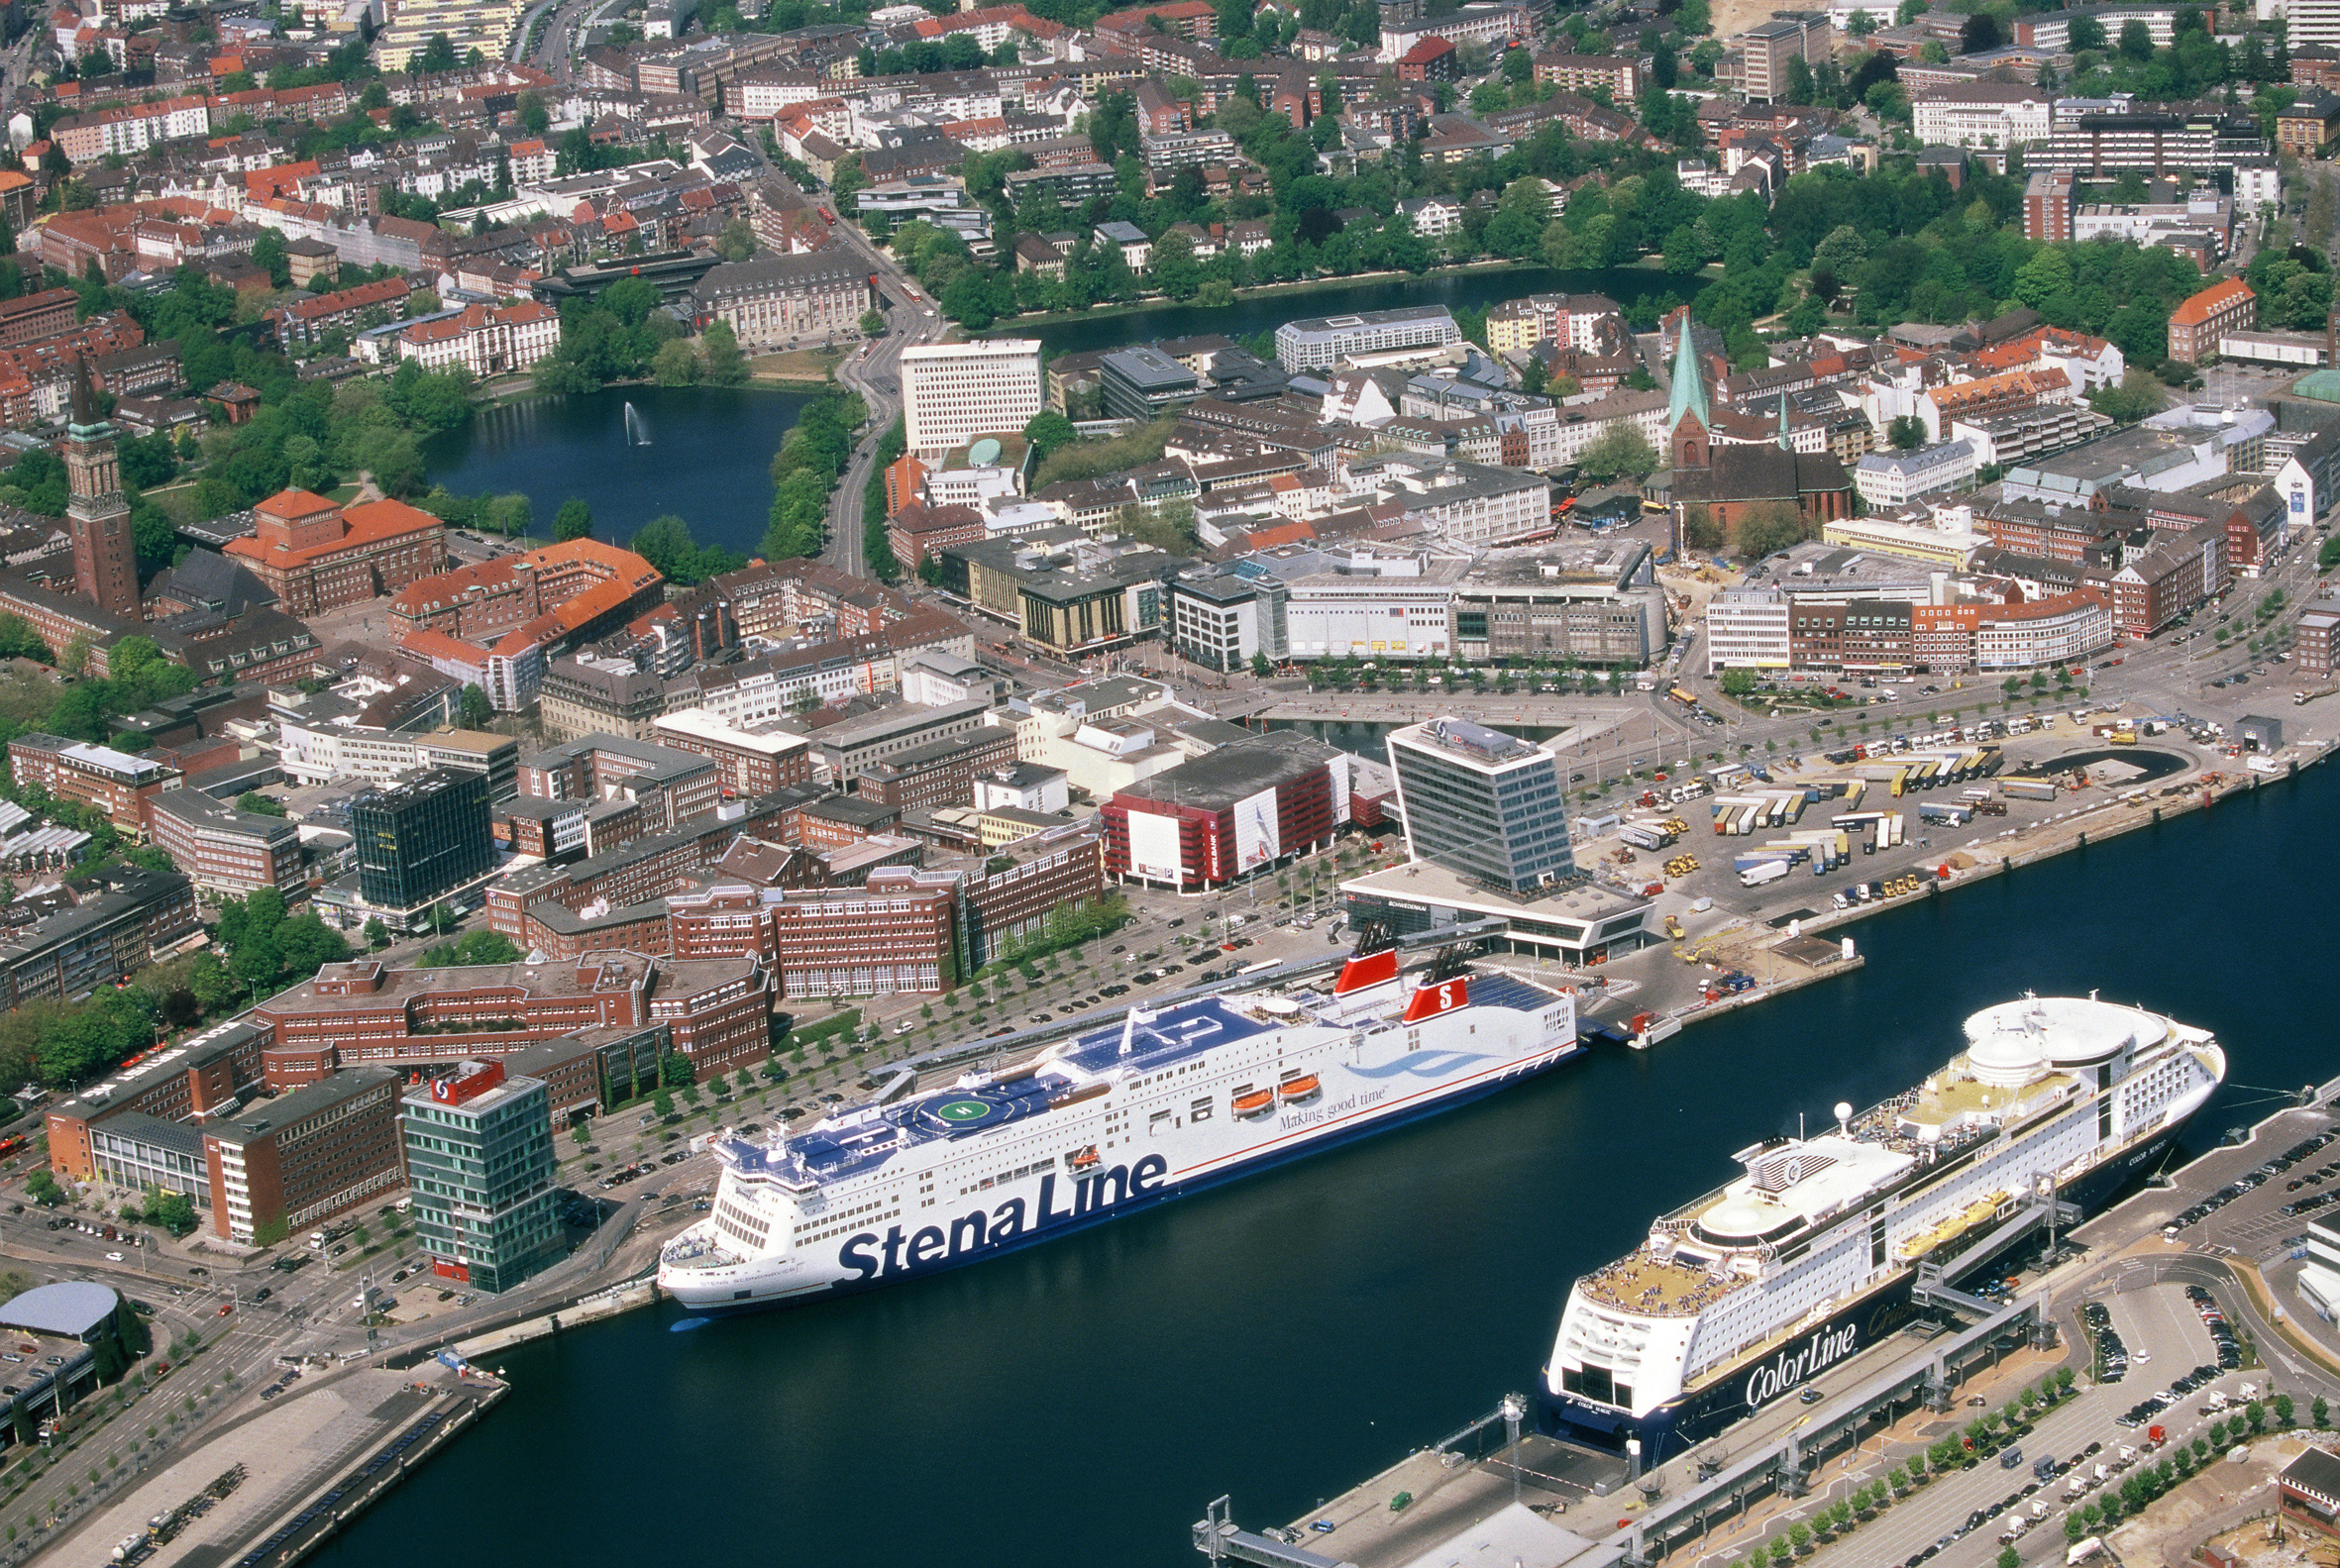 Aerial view of Kiel and the cruise terminals with two cruise ships docking.